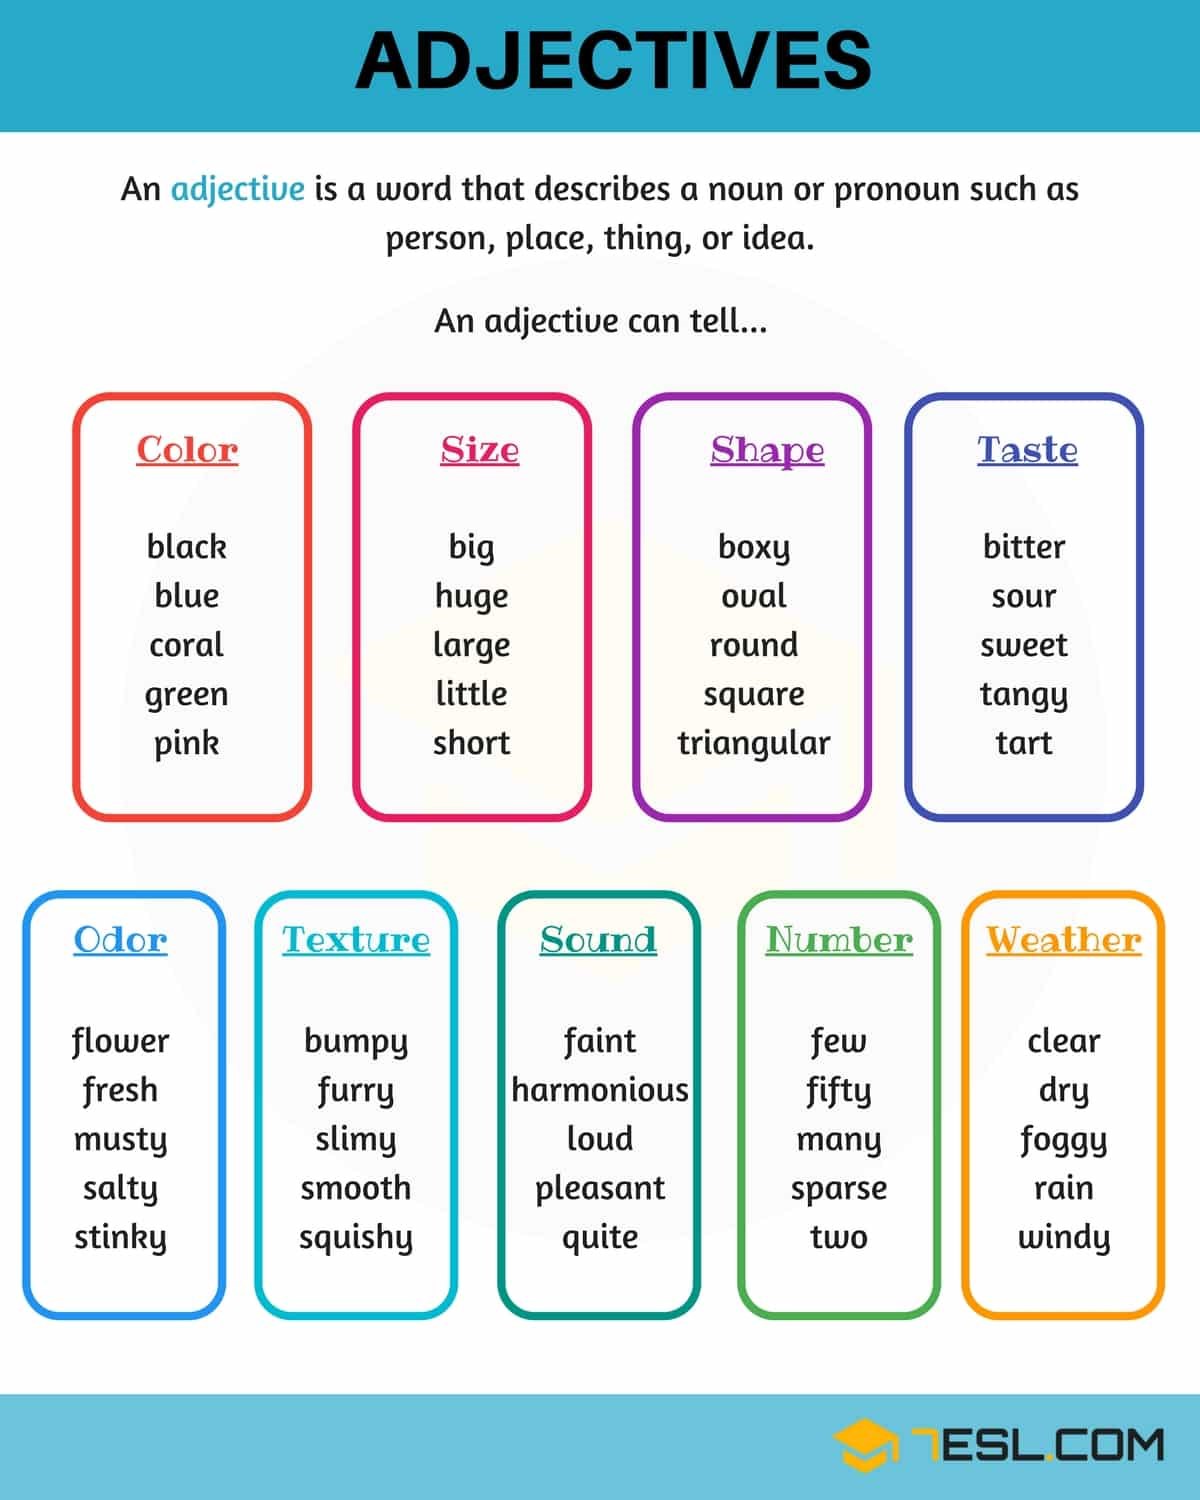 Can you do these things. Adjective. Adjective в английском. Adjectives in English. Adjectives урок.